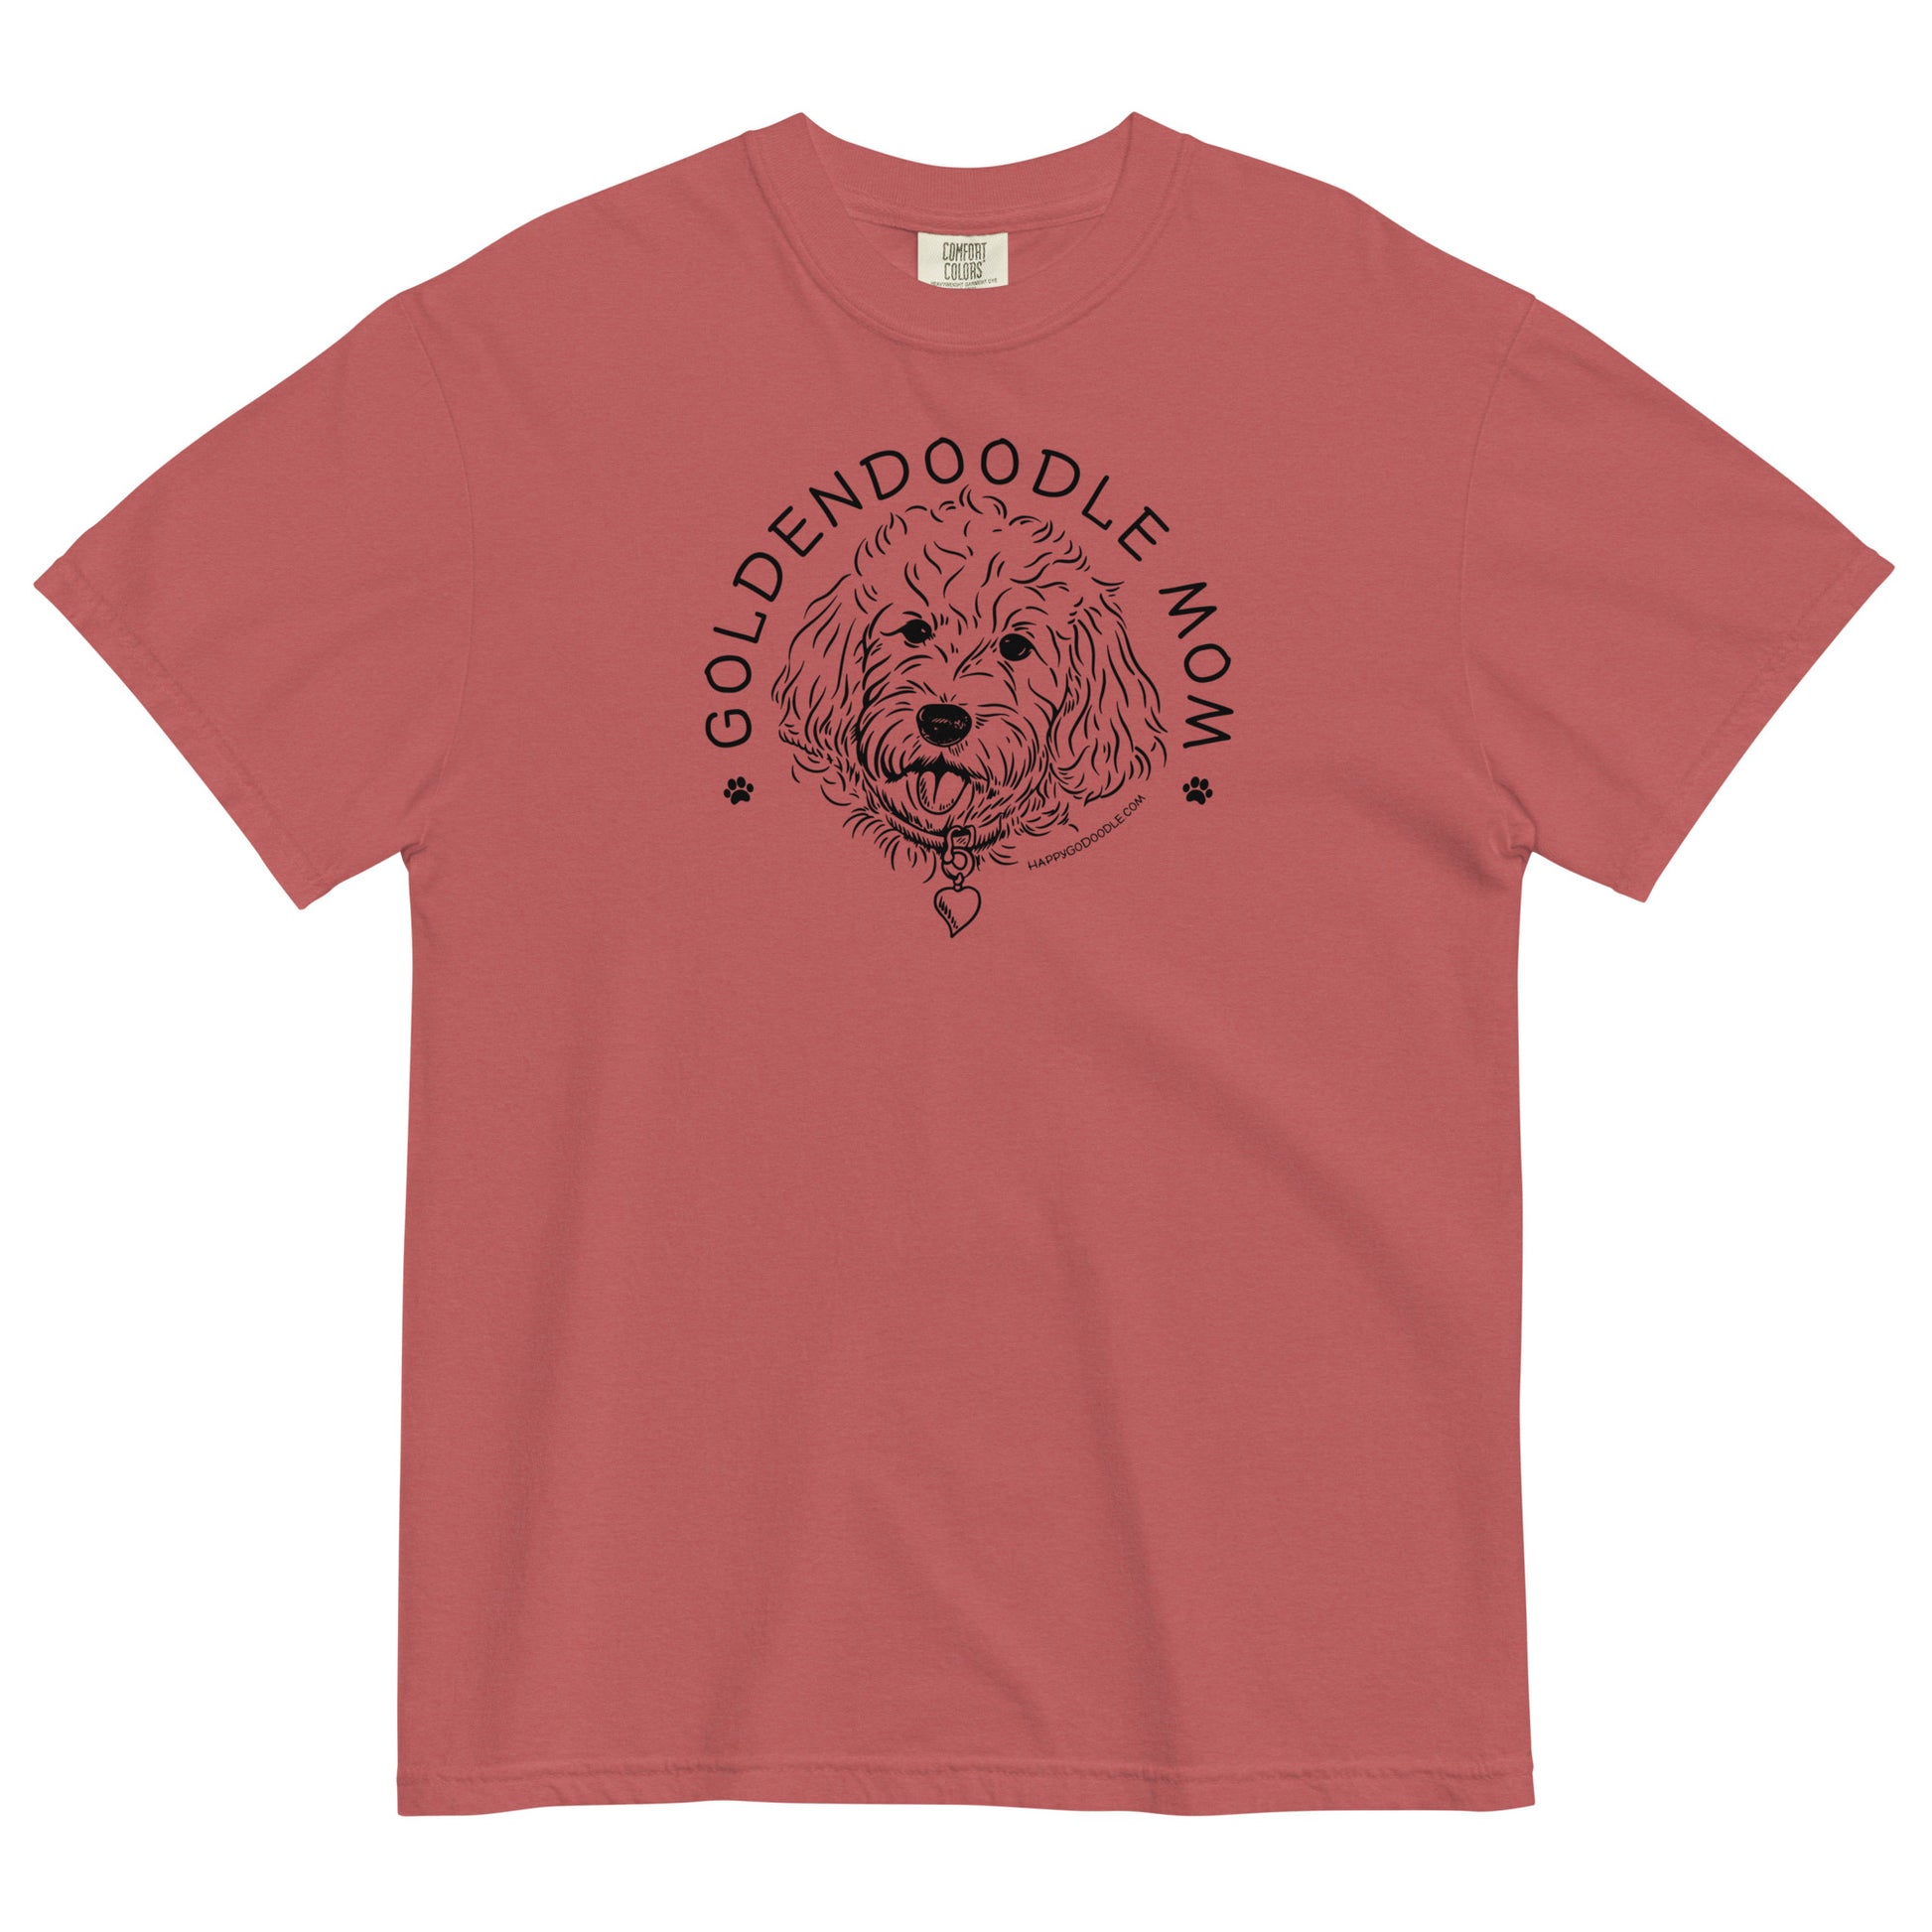 Goldendoodle Mom comfort colors t-shirt with Goldendoodle face and words "Goldendoodle Mom" in crimson color